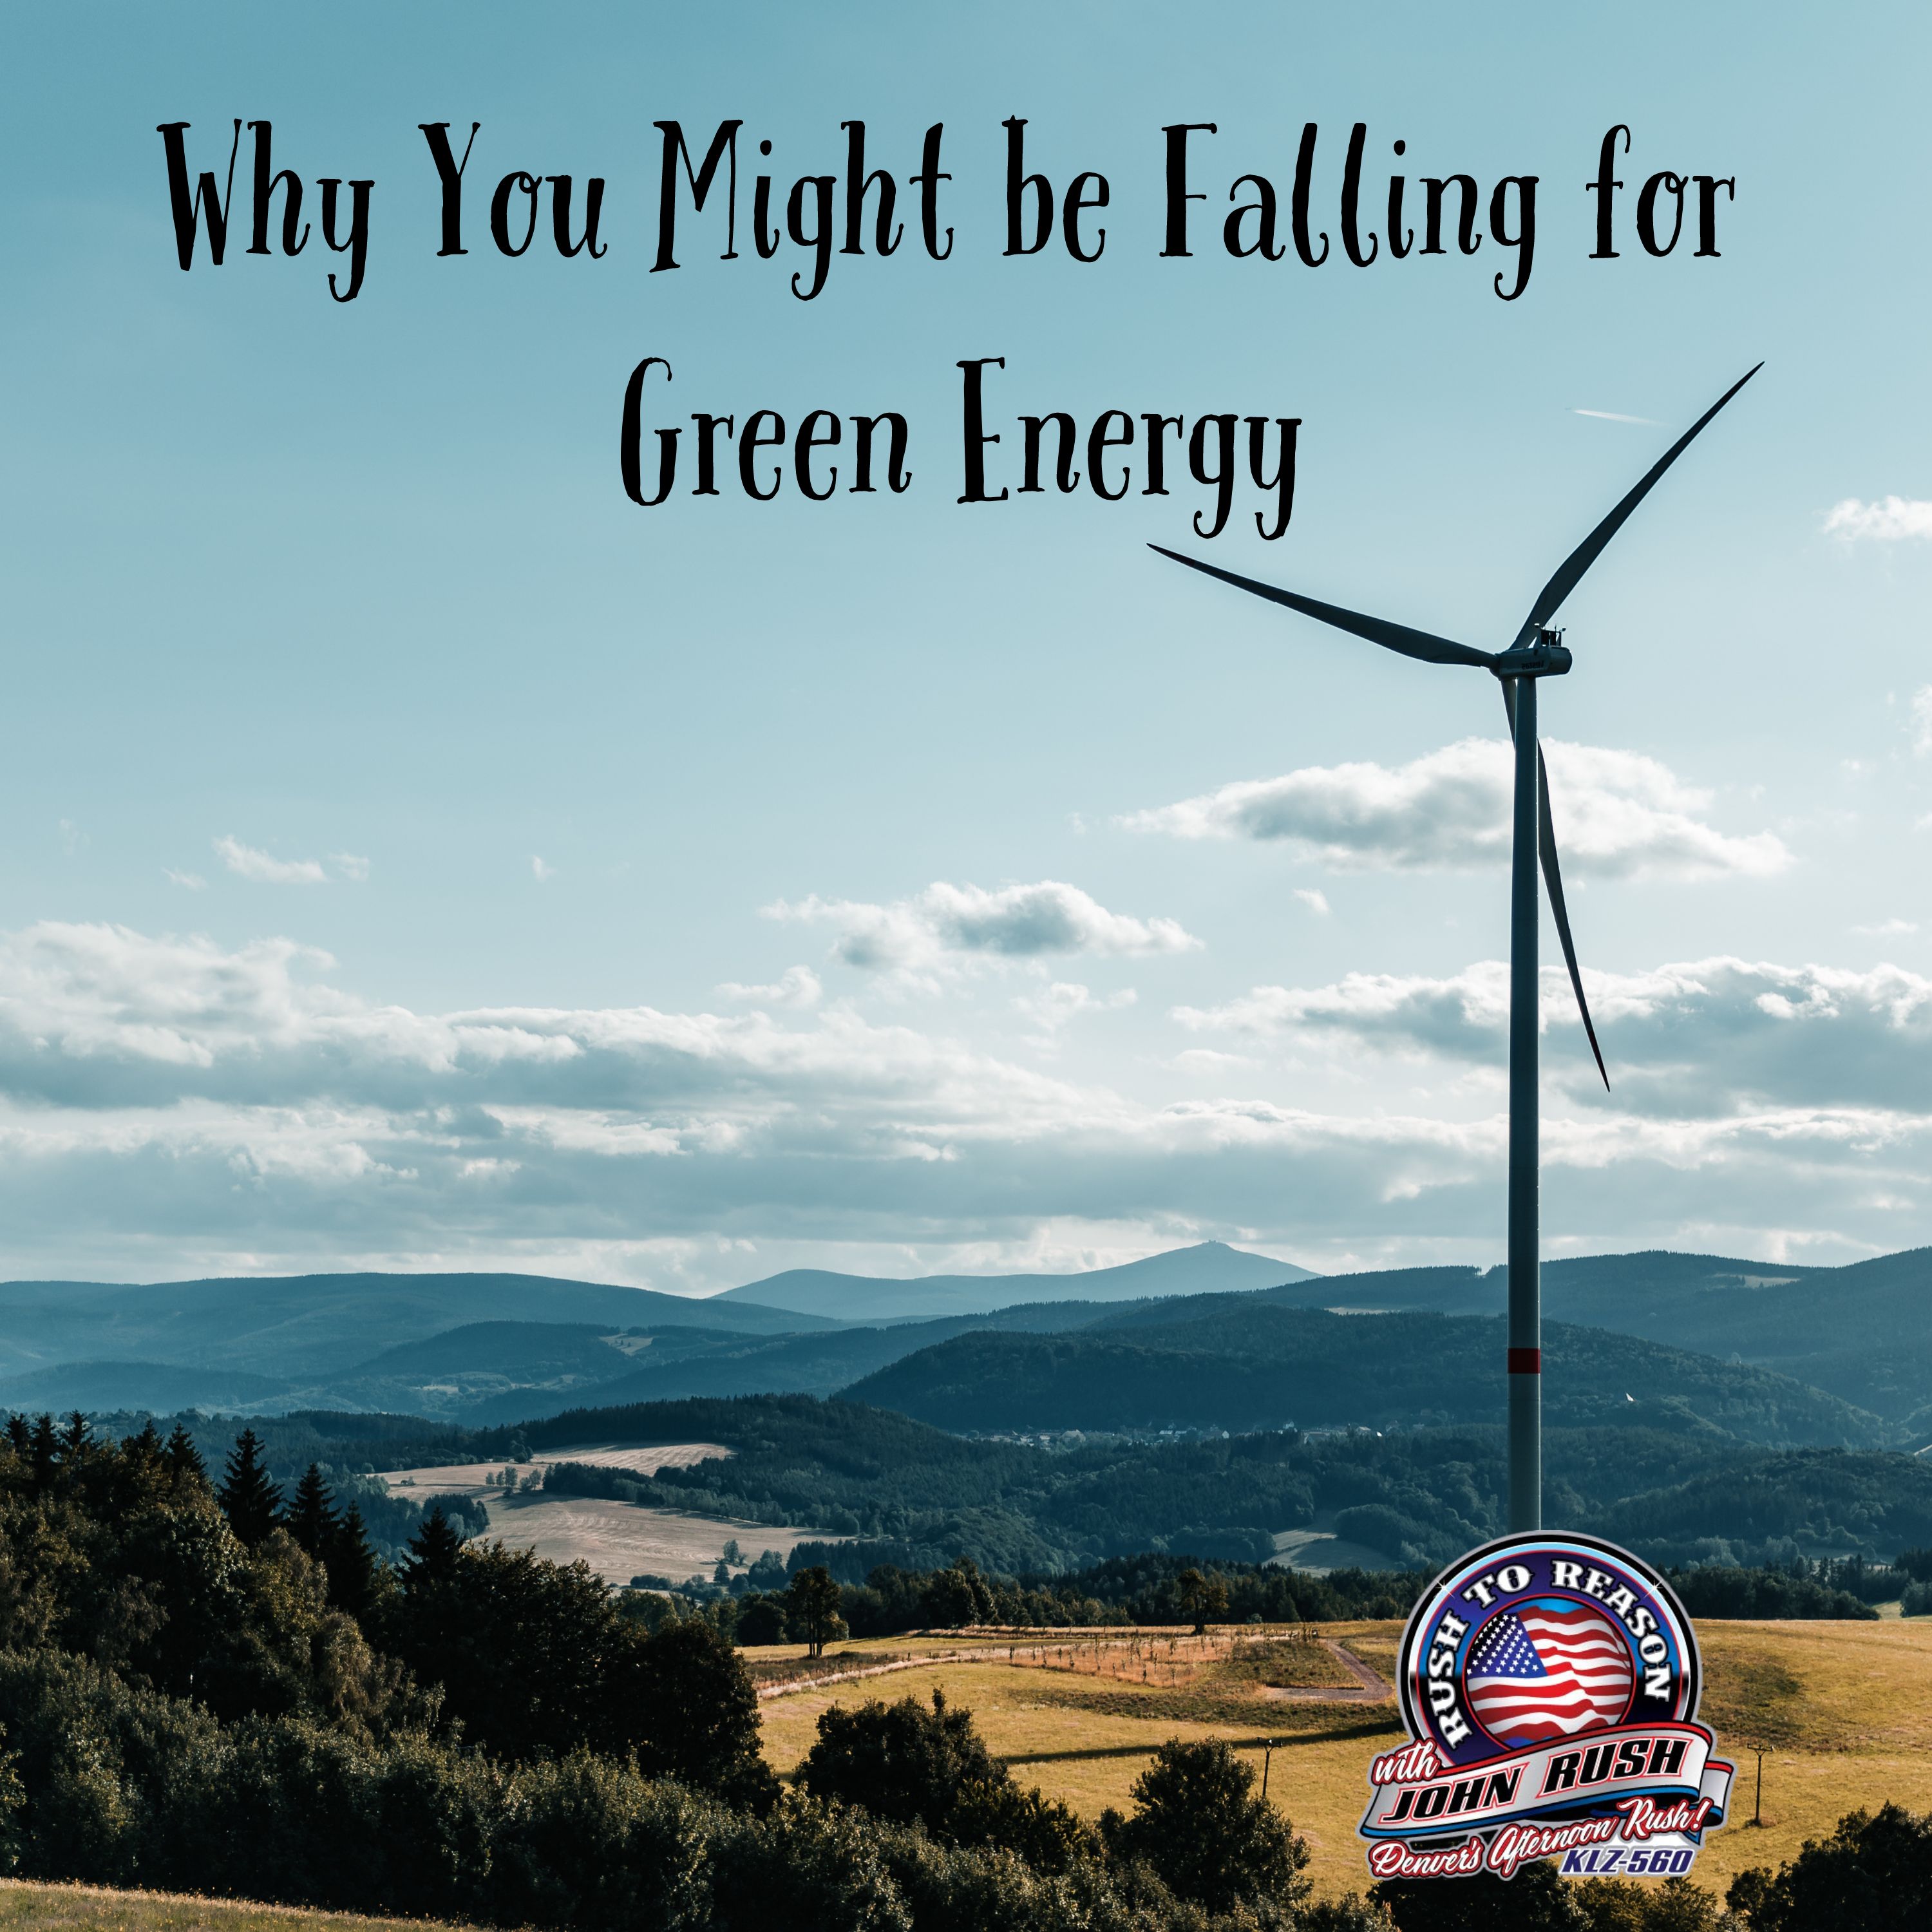 Why You Might be Falling for Green Energy